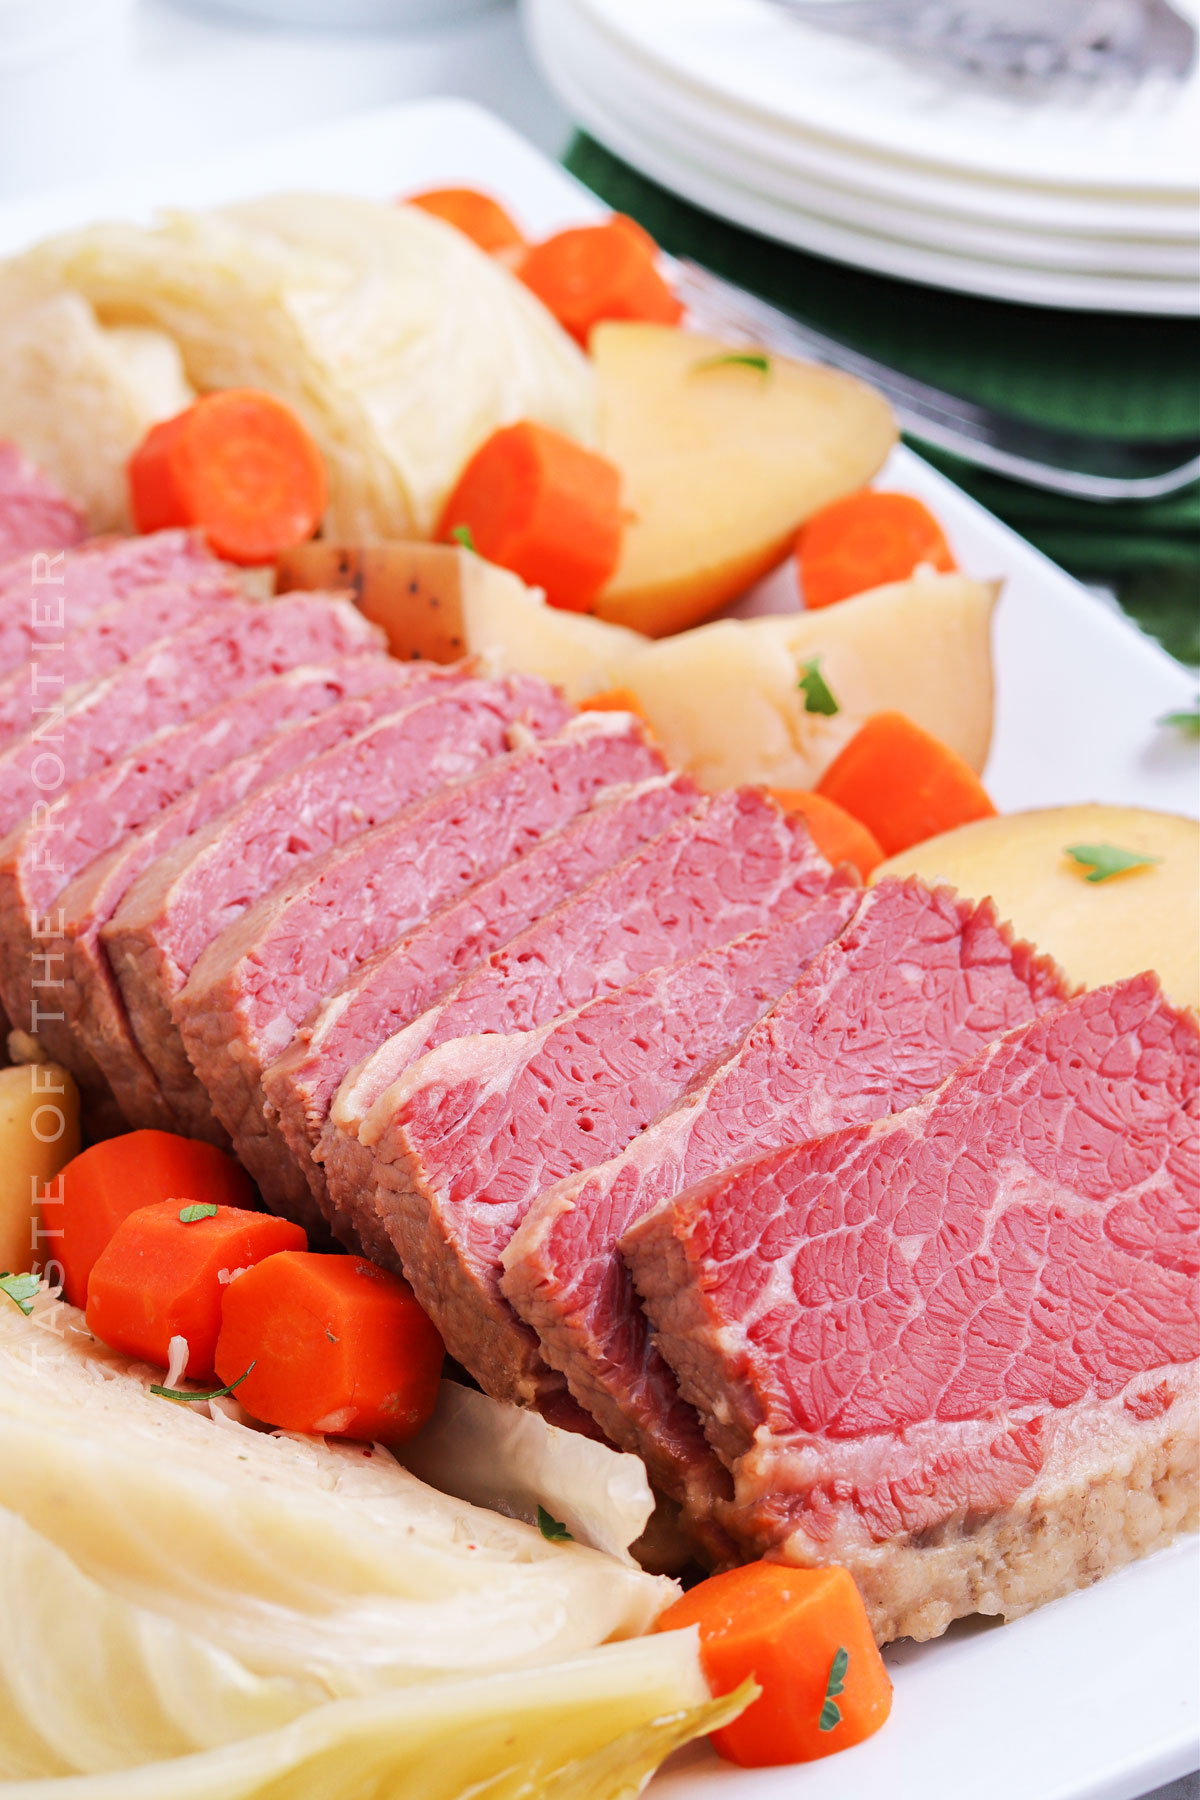 Slow Cooker Corned Beef and Cabbage recipe